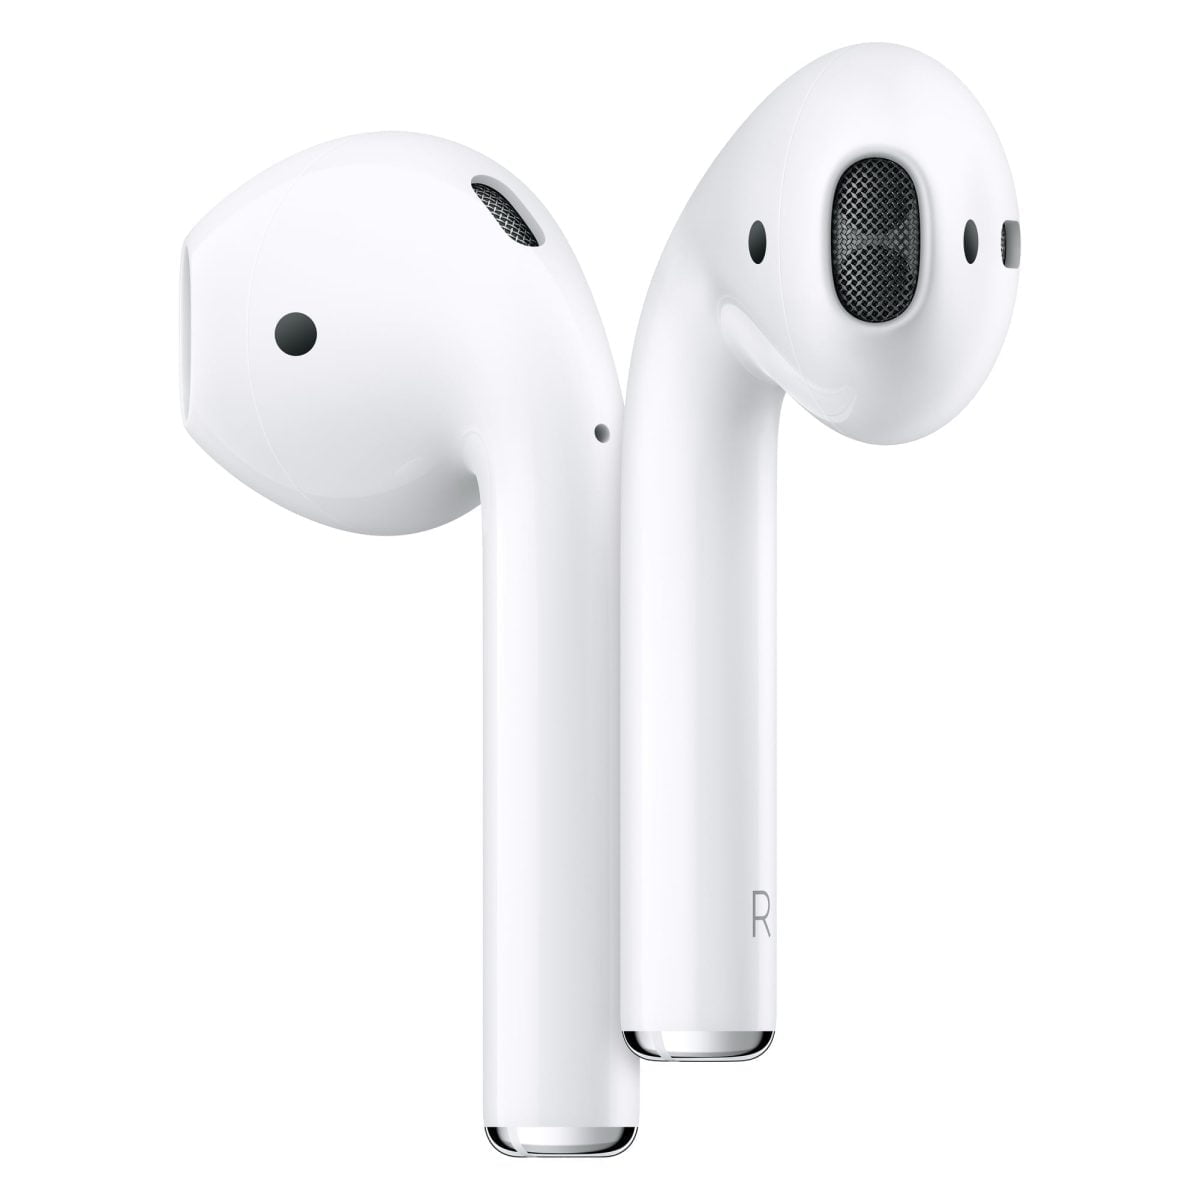 Mv7N2 Av1 Apple &Lt;H1&Gt;Apple Airpods (2Nd Generation) - White&Lt;/H1&Gt; &Lt;Div Class=&Quot;Product-Description&Quot;&Gt;With High-Quality Sound, Voice-Activated Siri, And Complete With Charging Case That Provides Over 24 Hours Of Listening Time, Airpods Deliver An Unparalleled Wireless Headphone Experience. They’re Ready To Use With All Of Your Devices. Put Them In Your Ears And They Connect Immediately, Immersing You In Rich, High-Quality Sound. Just Like Magic.&Lt;/Div&Gt; Airpods Apple Airpods (2Nd Generation) - White (Mv7N2)